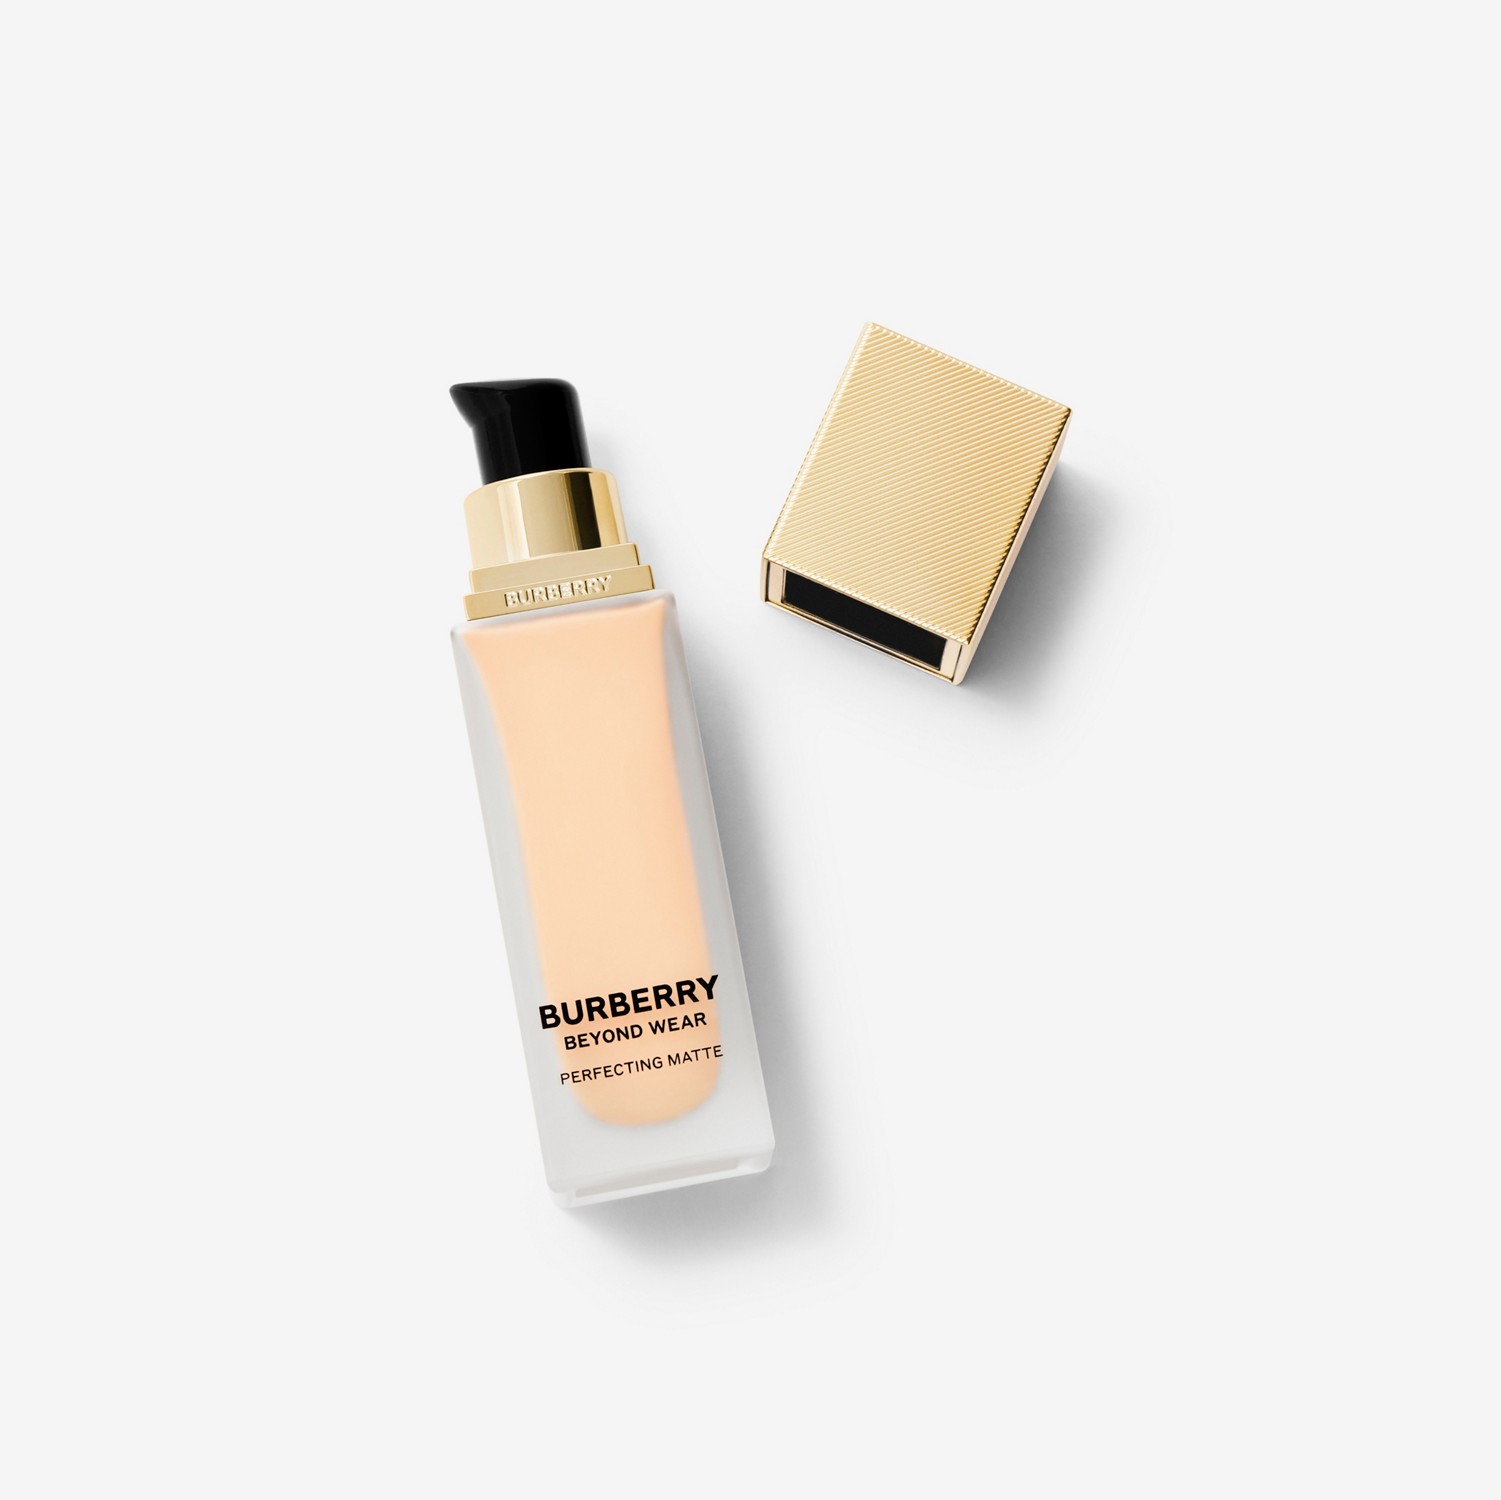 Beyond Wear Perfecting Matte Foundation – 10 Fair Warm - Mulheres | Burberry® oficial